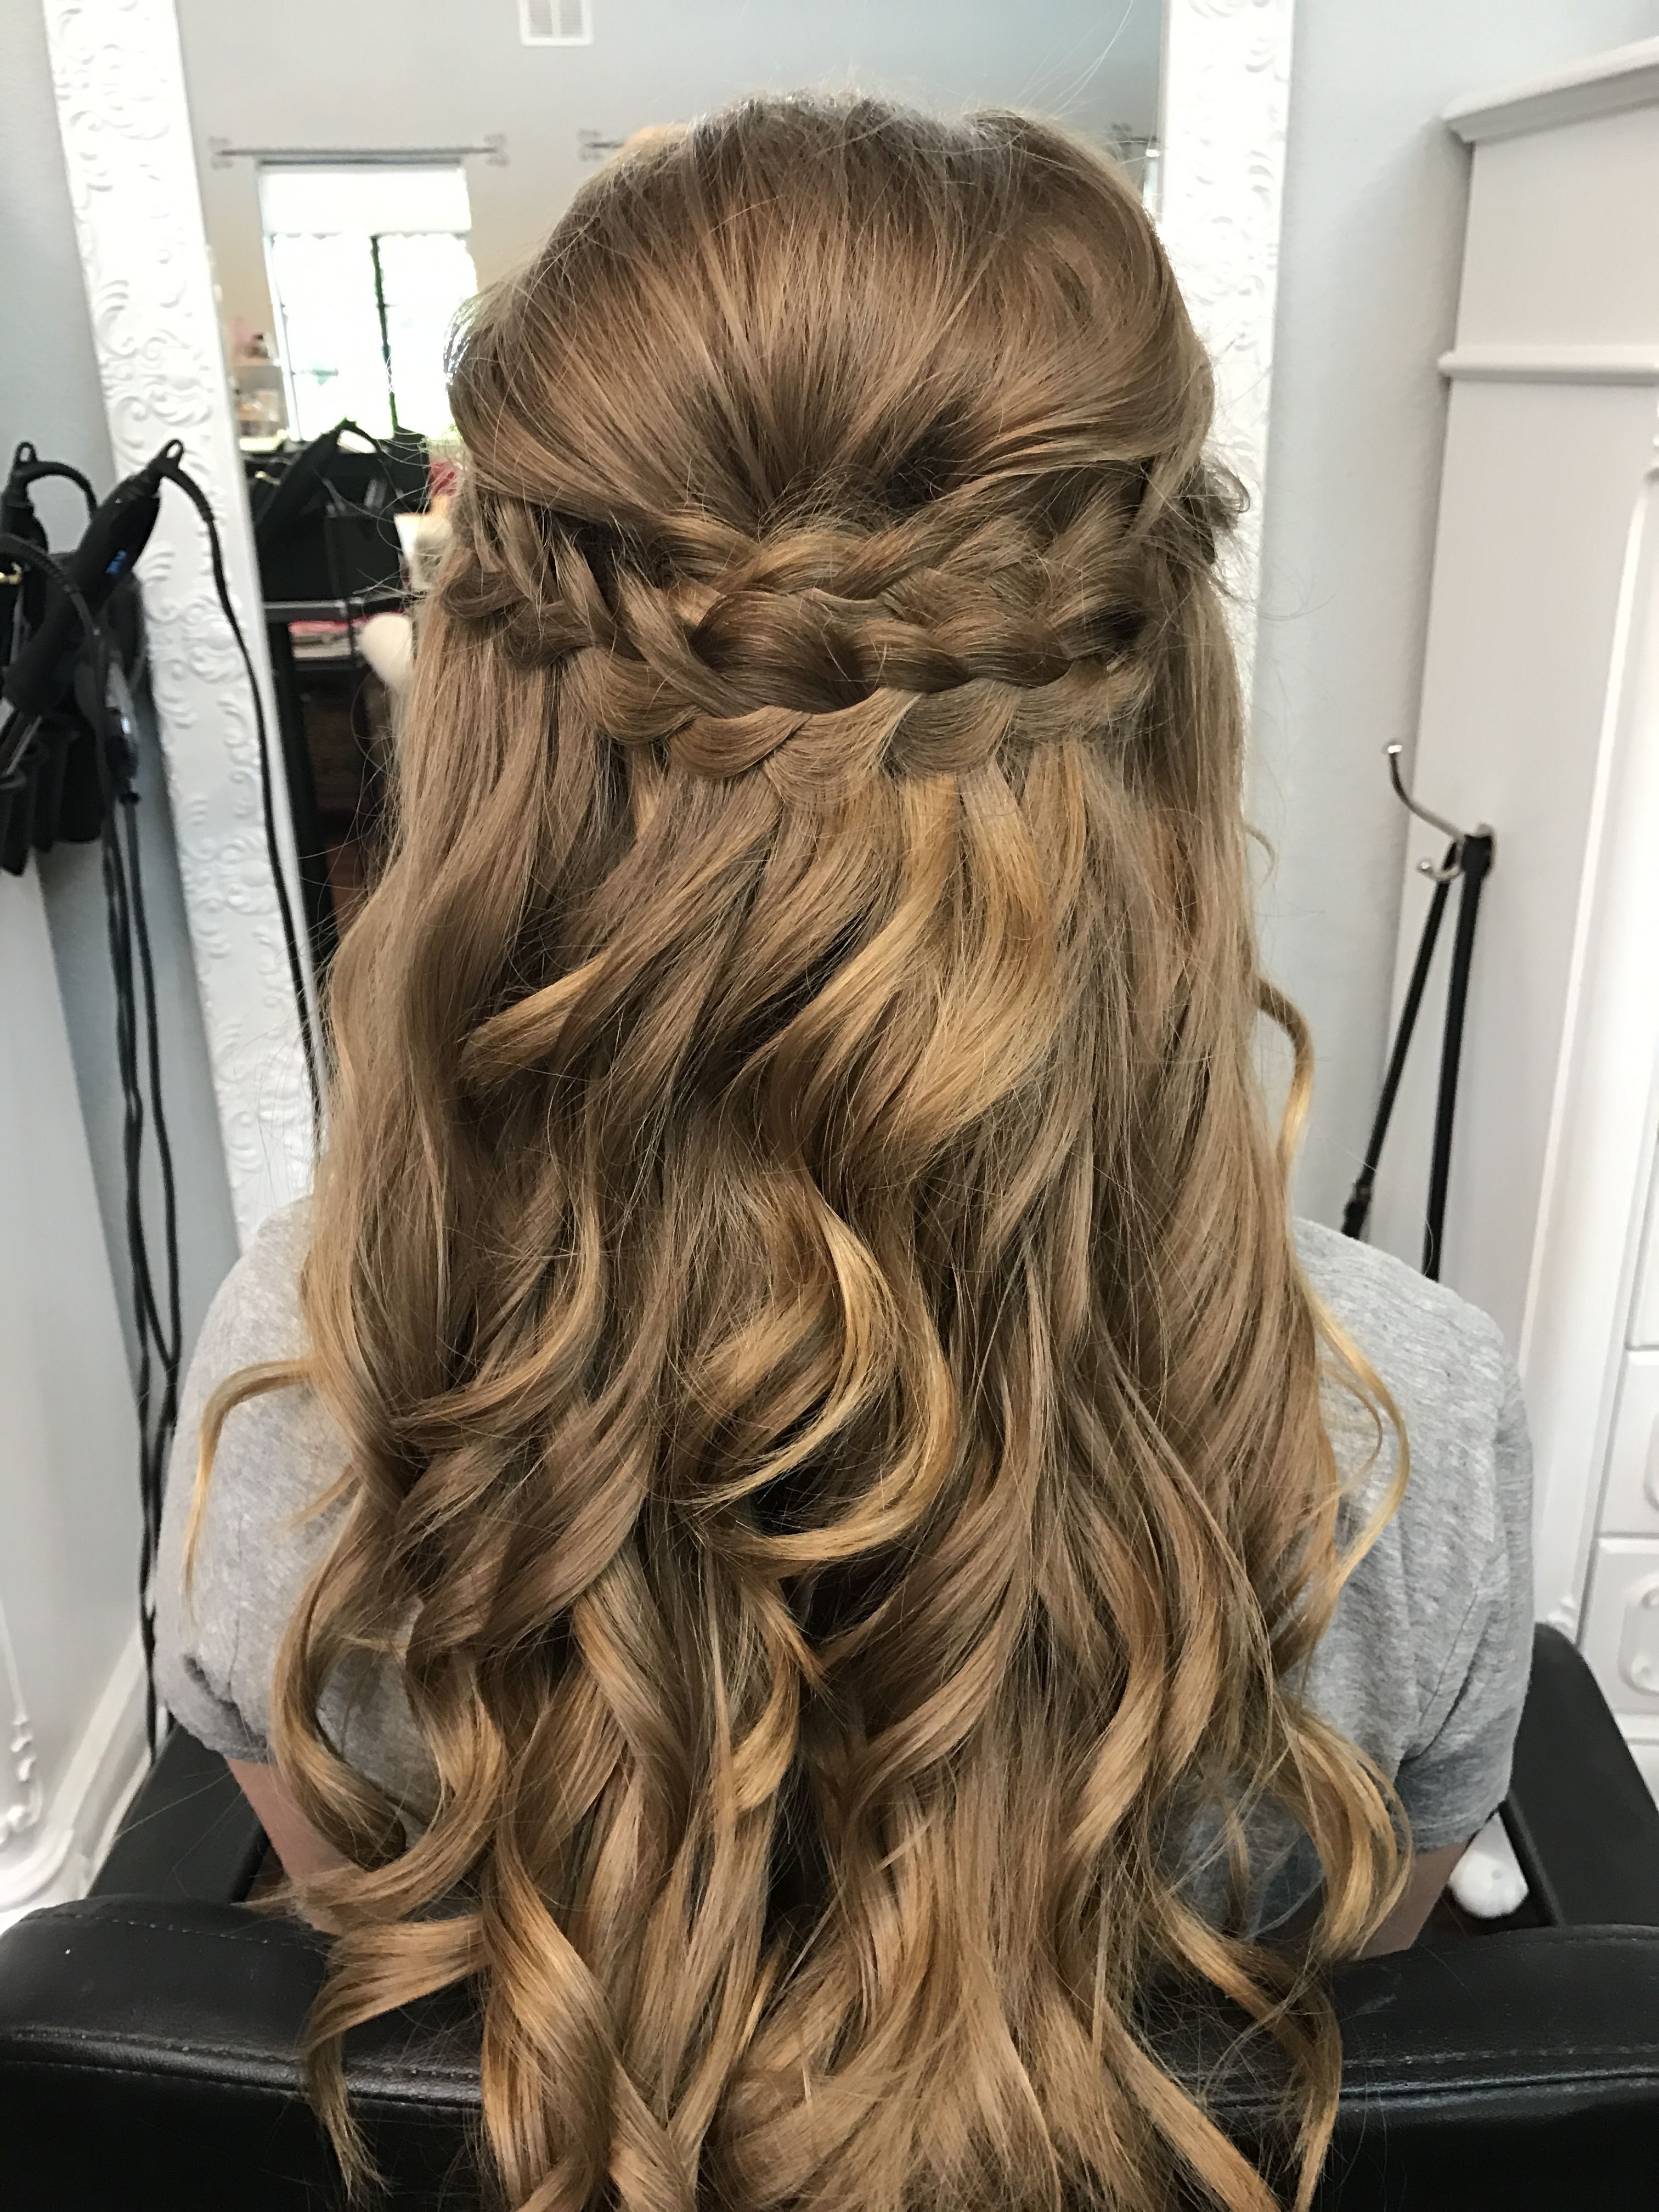 Braided Half Up Half Down Prom Hair (View 9 of 15)